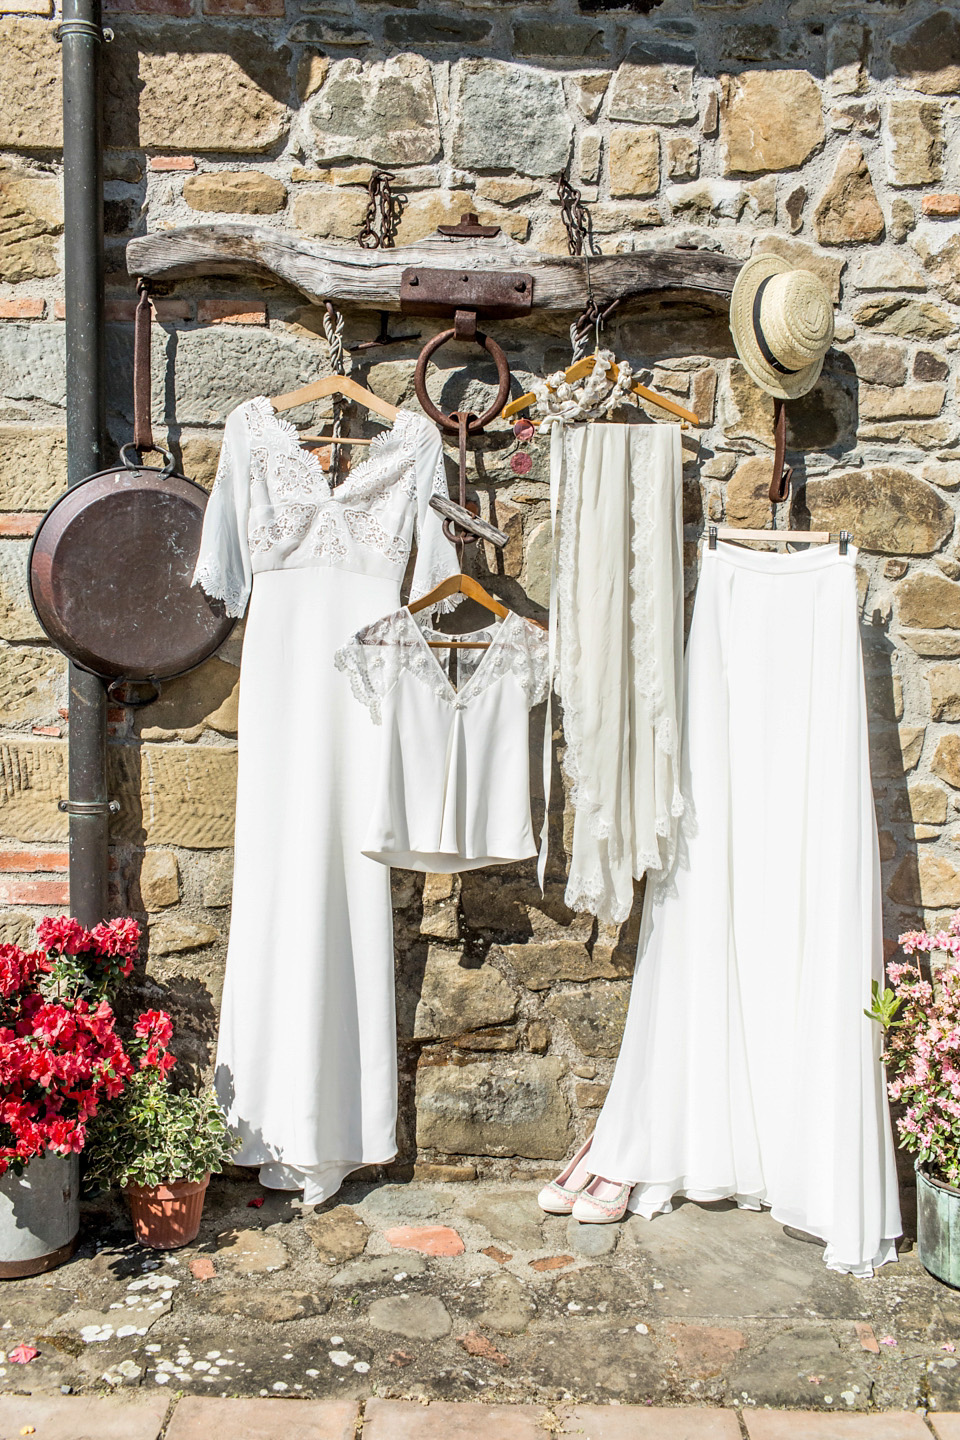 Italian wedding inspiration - relaxed, boho, woodland wedding style. Dresses by Belle & Bunty, Photography by Charlotte Hu, concept + styling by Italian Eye - specialists in wedding and event planning in Italy.